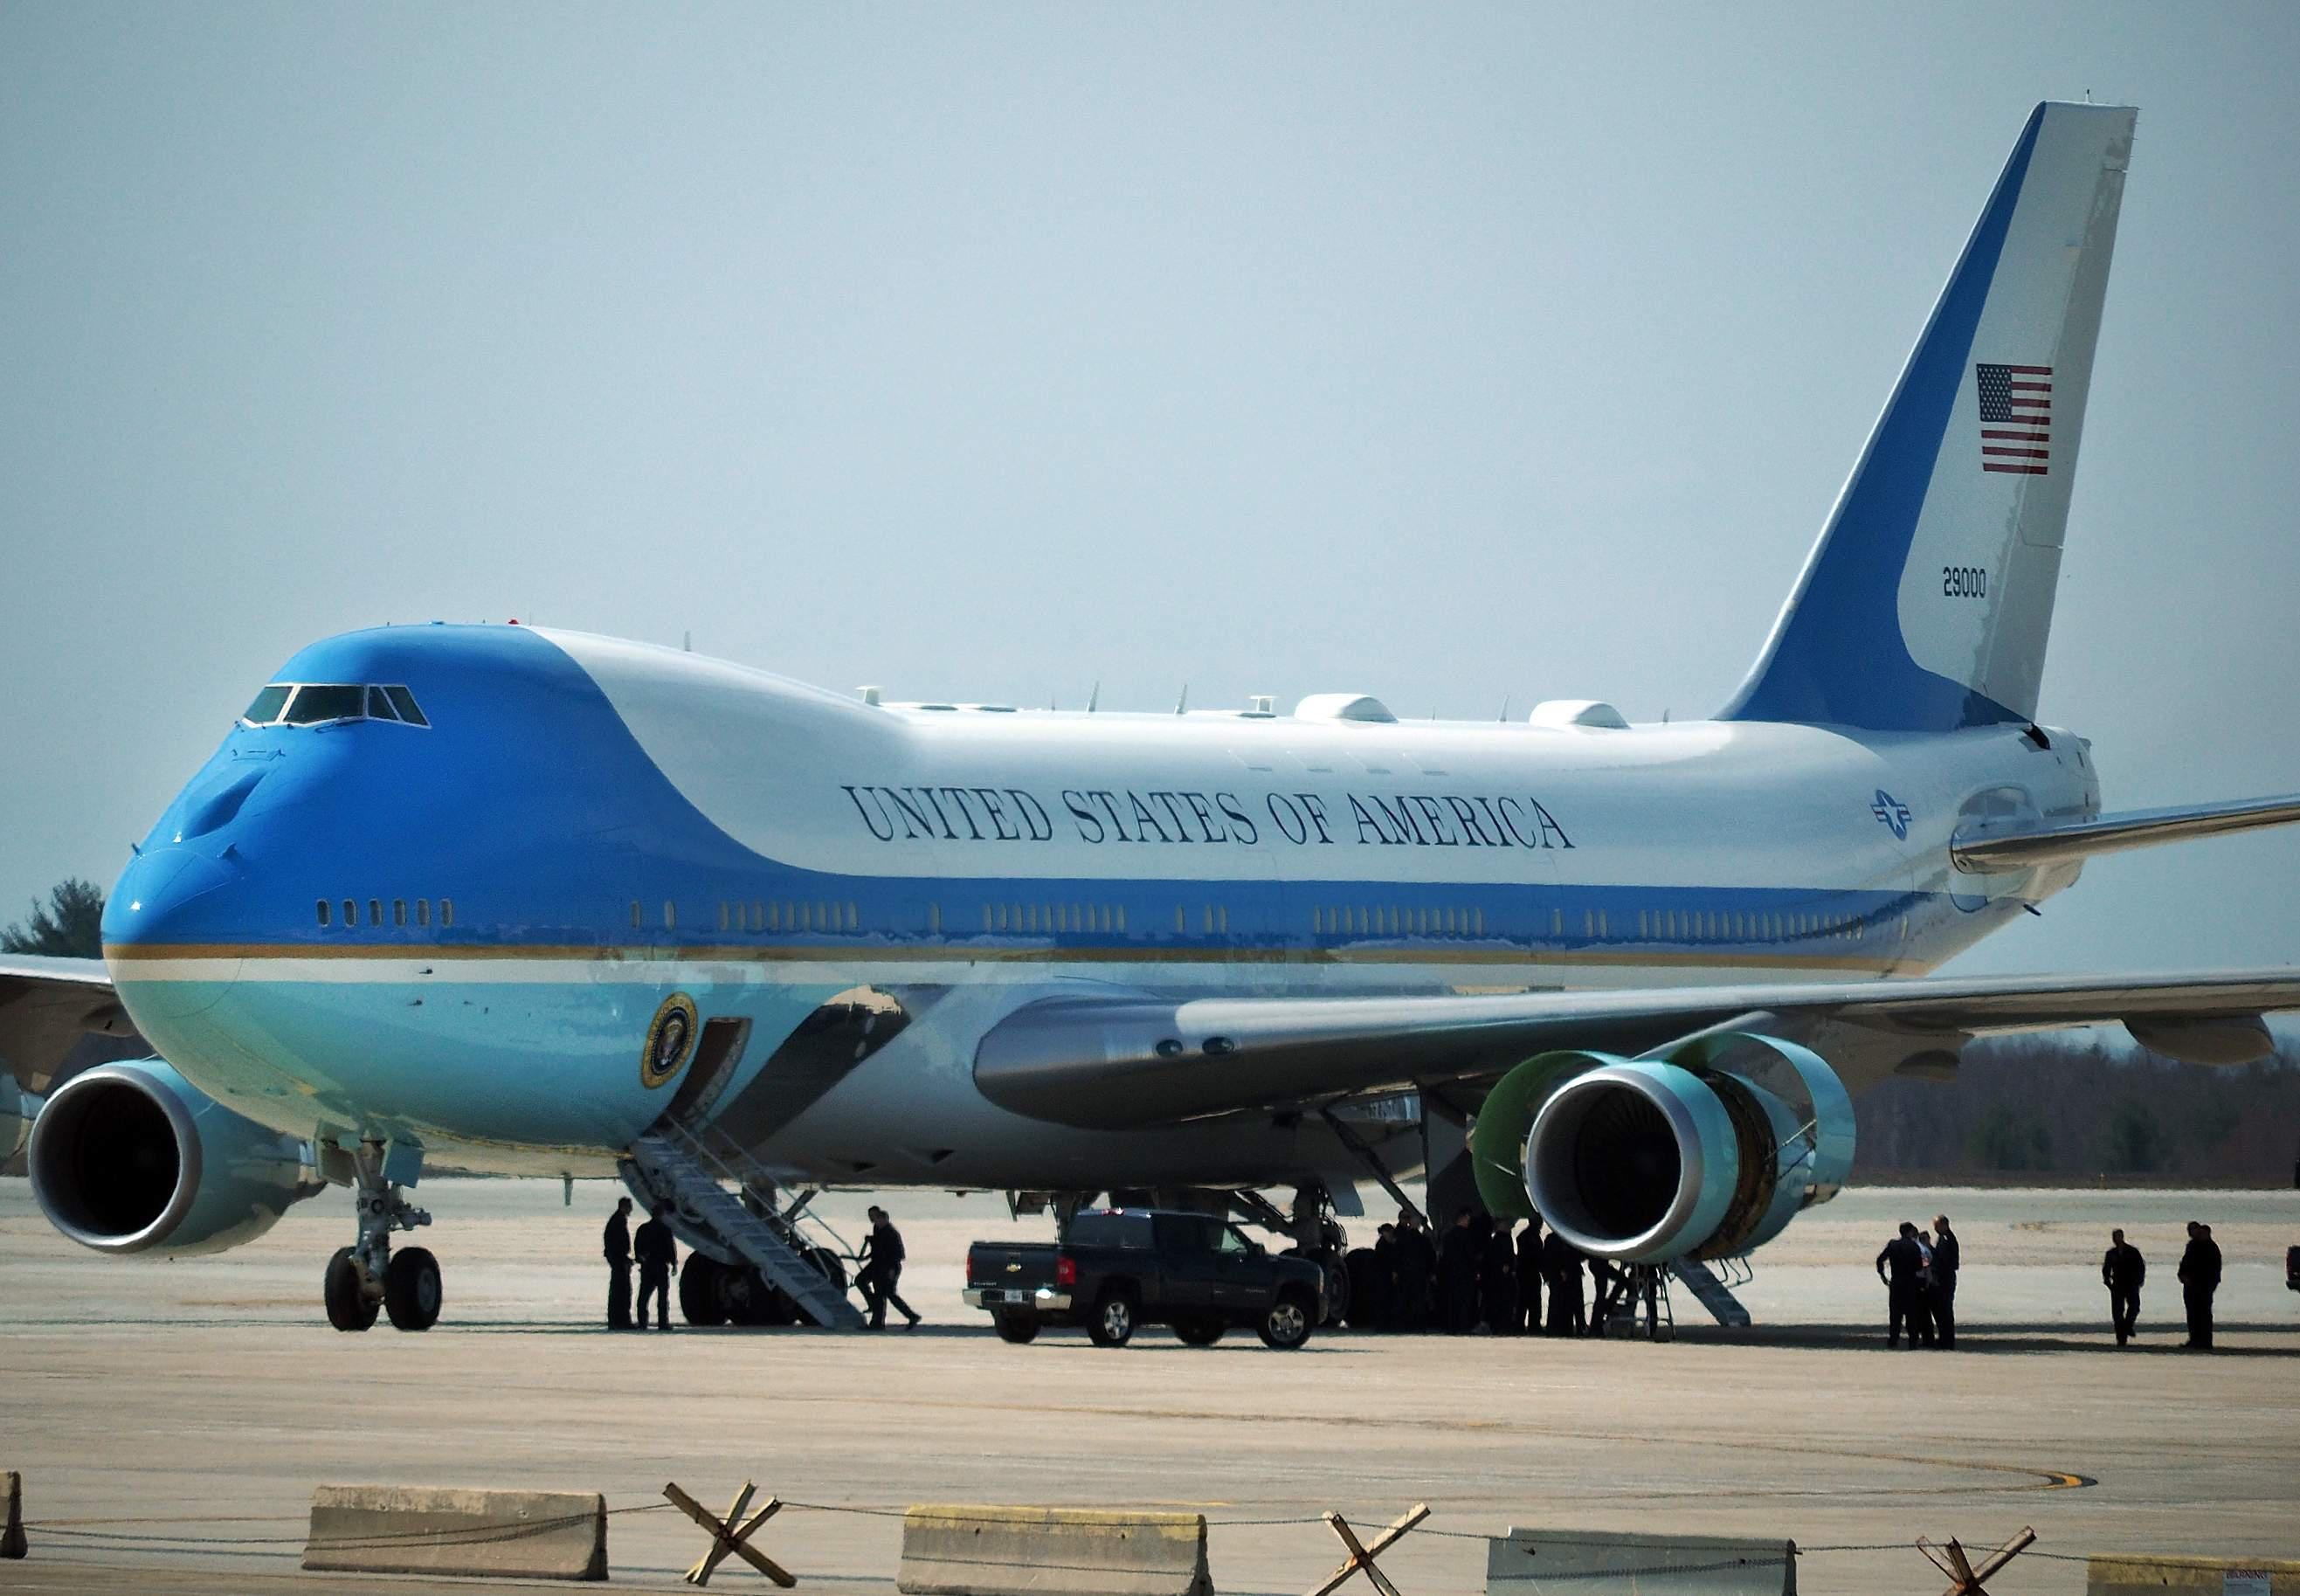 air force one 70